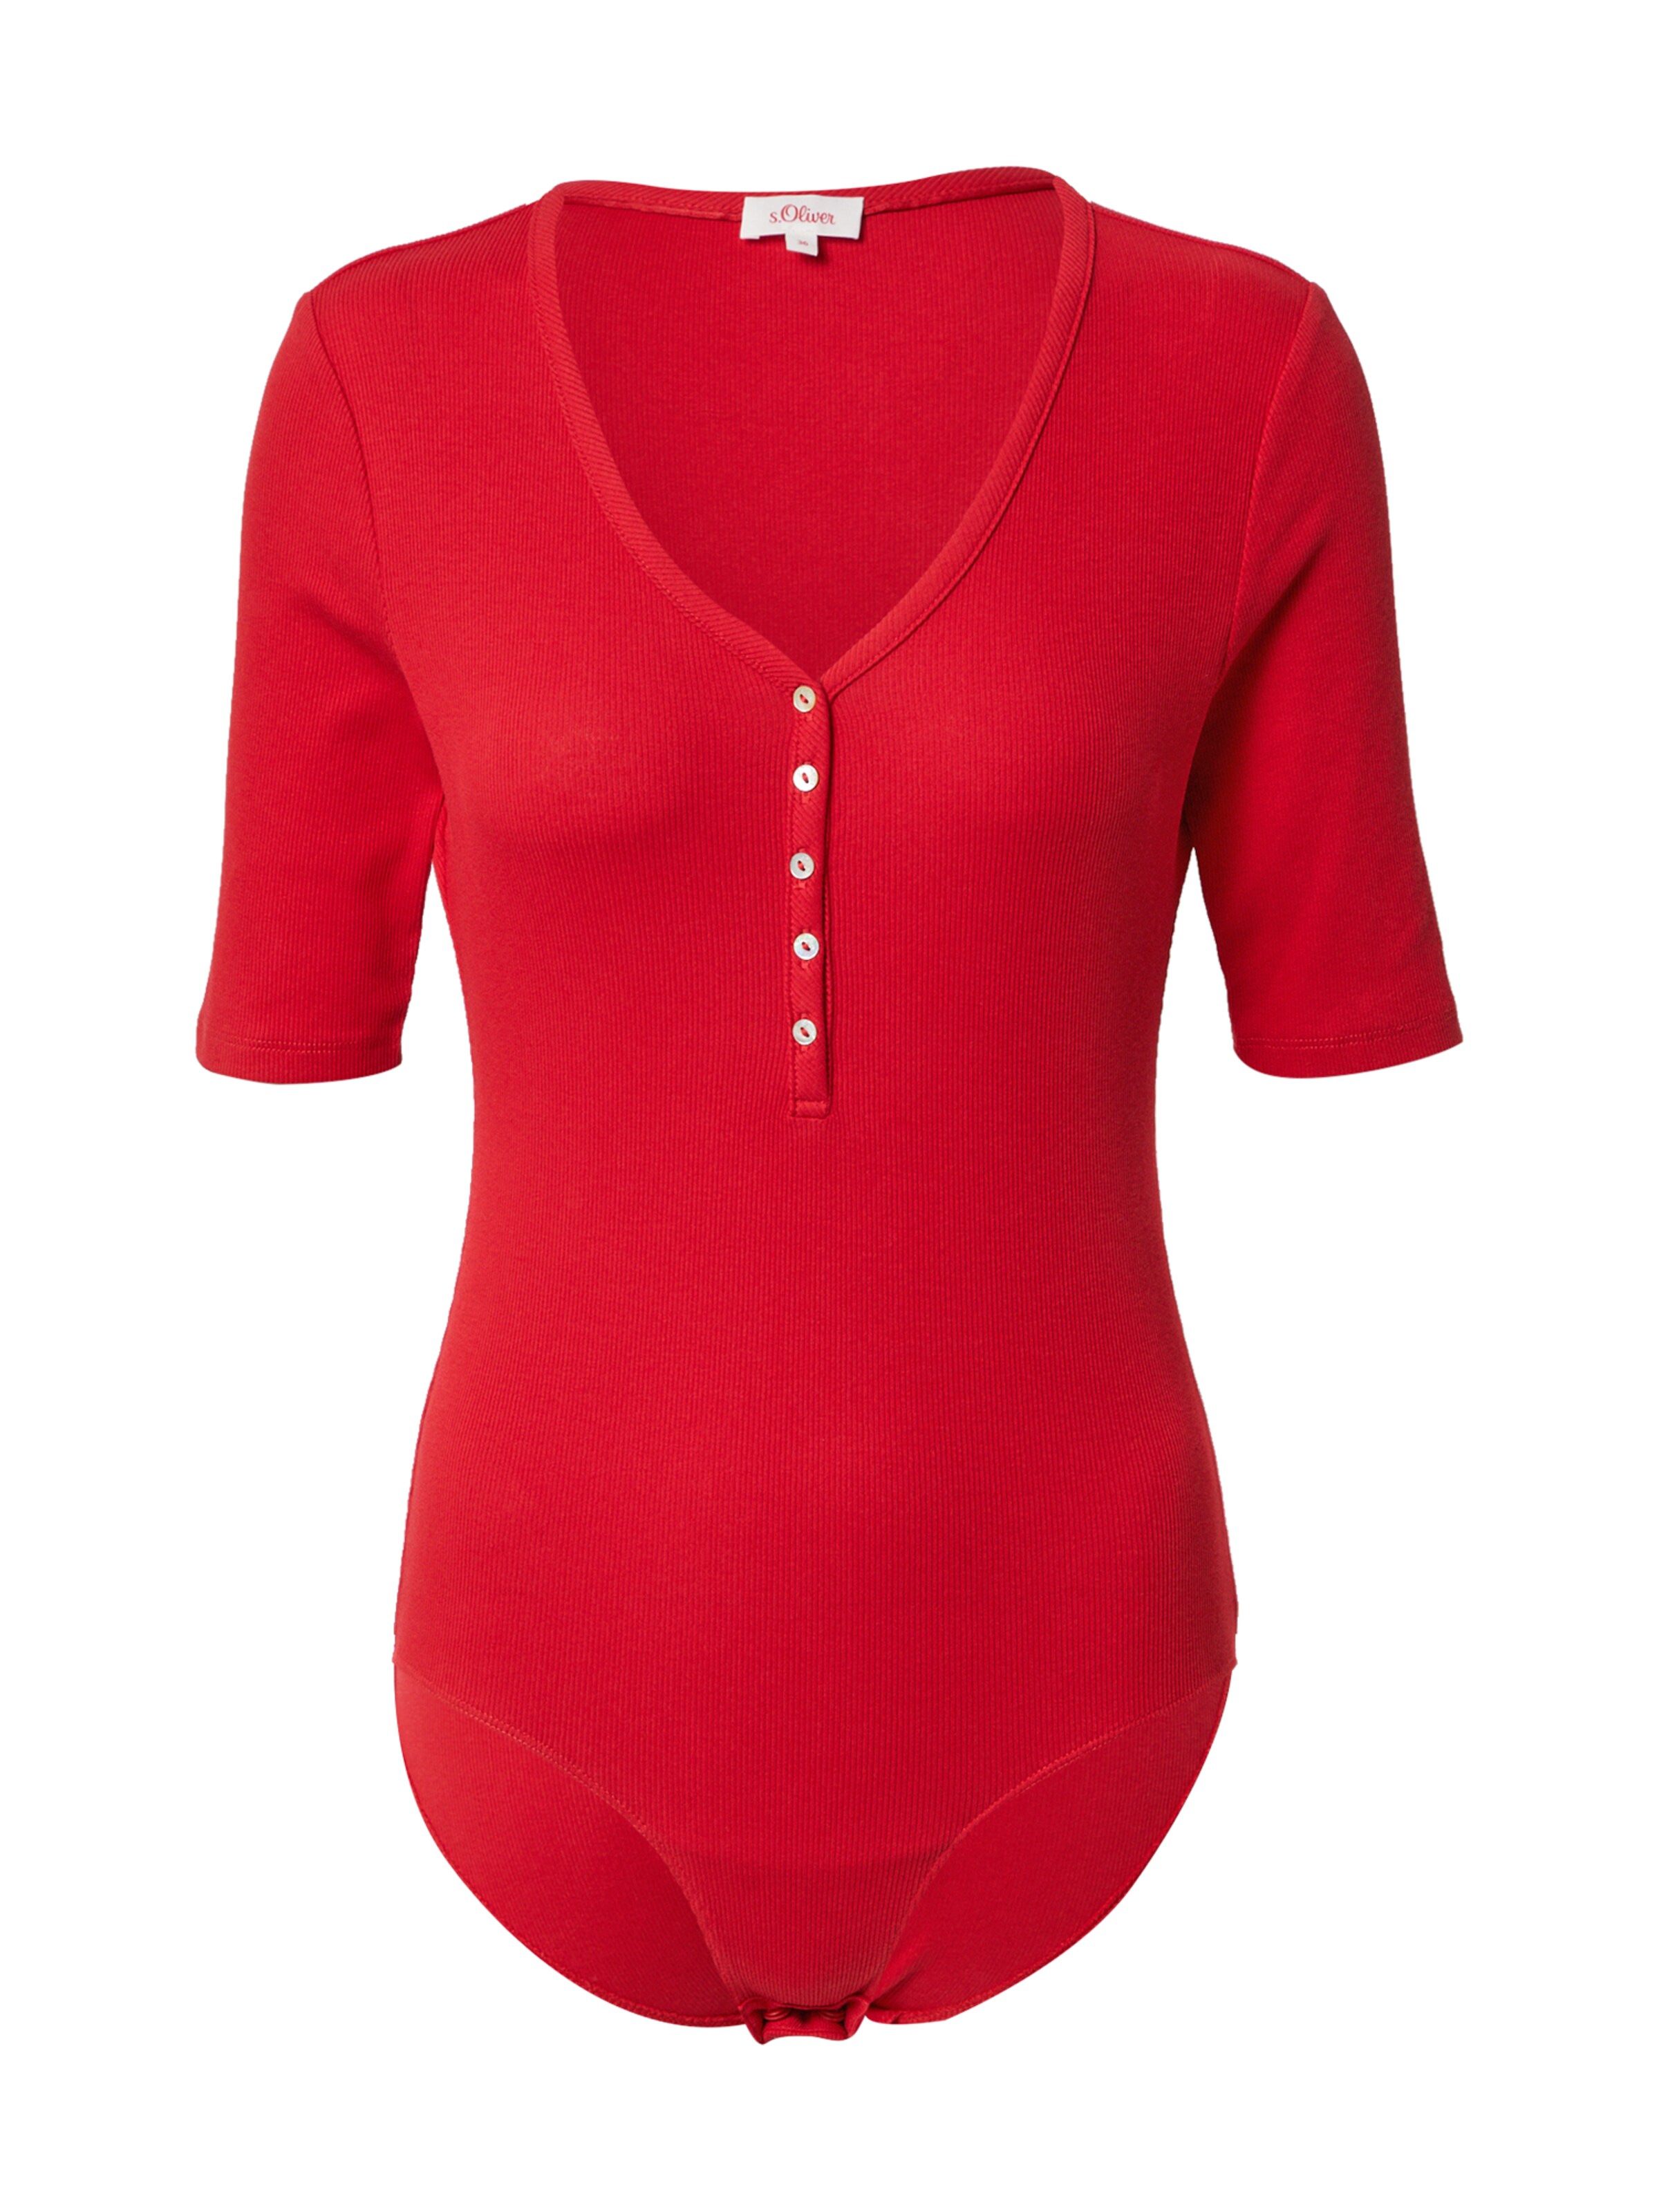 Frauen Shirts & Tops s.Oliver Shirtbody in Rot - MP93644